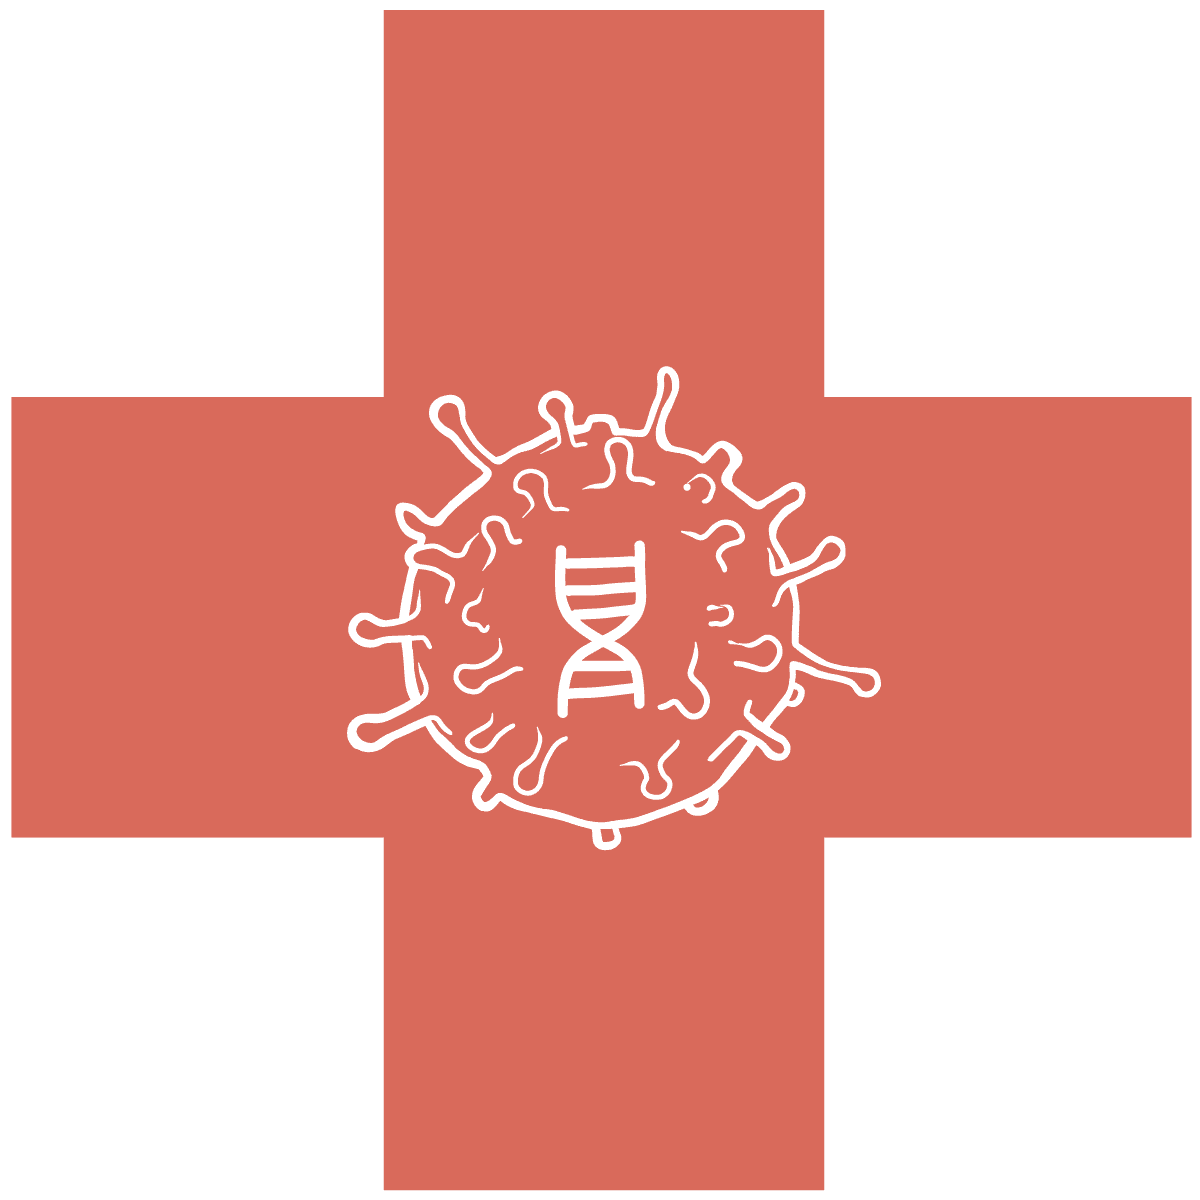 a white dna strand over a red medical cross